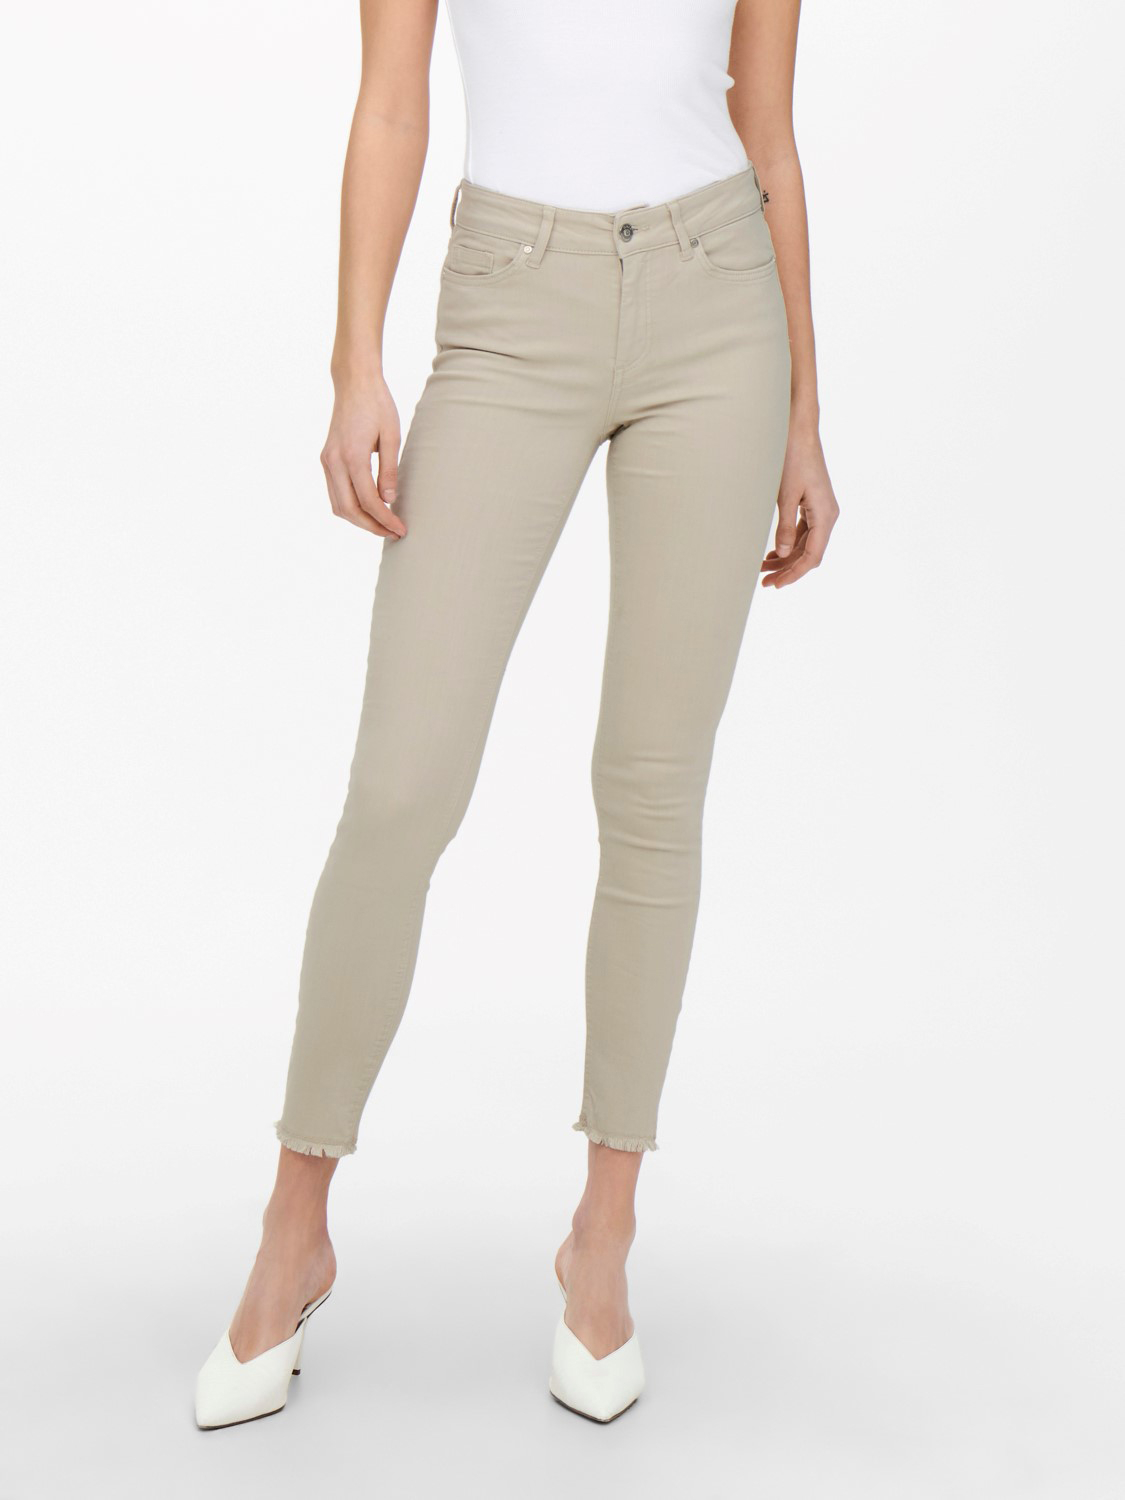 Only pantalones vaqueros de mujer Blush mid waist skinny ankle 15183652 beige claro